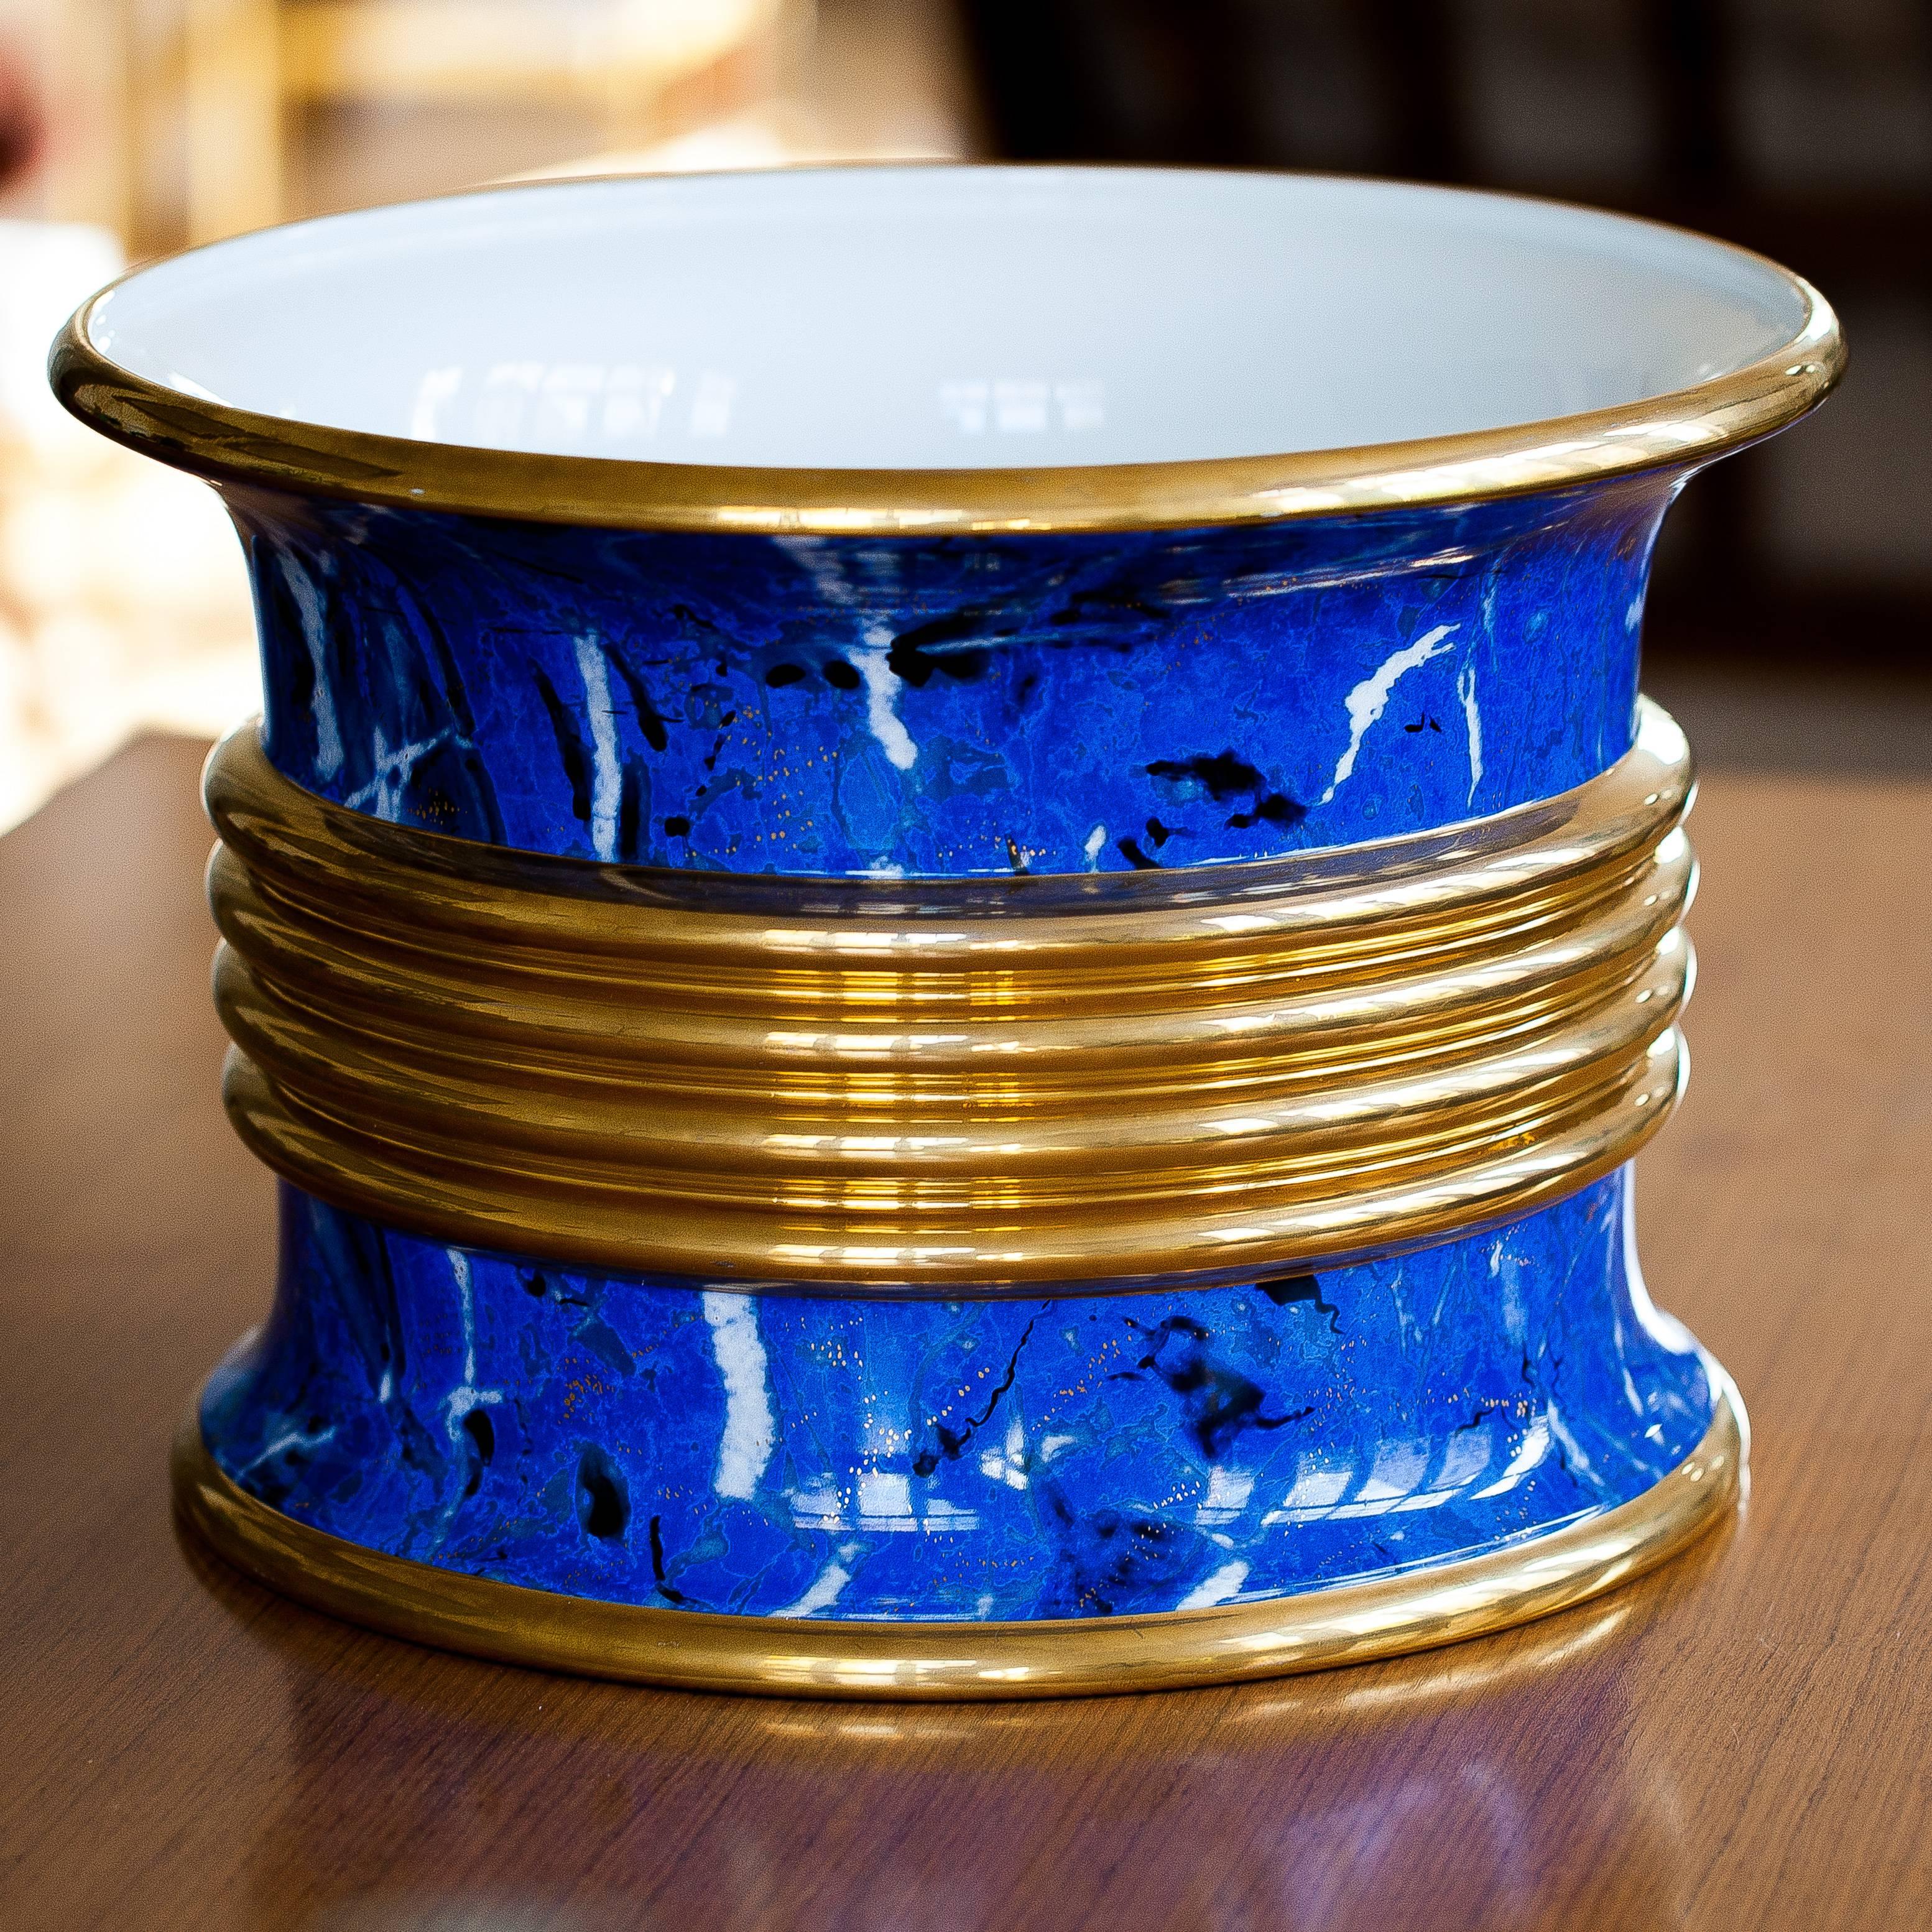 This cache-pot is so impressive. With a perfect lapis color and golden spotted this piece is very decorative. It was made in the 80s by Christian Dior, you can see the signature under the ceramic.